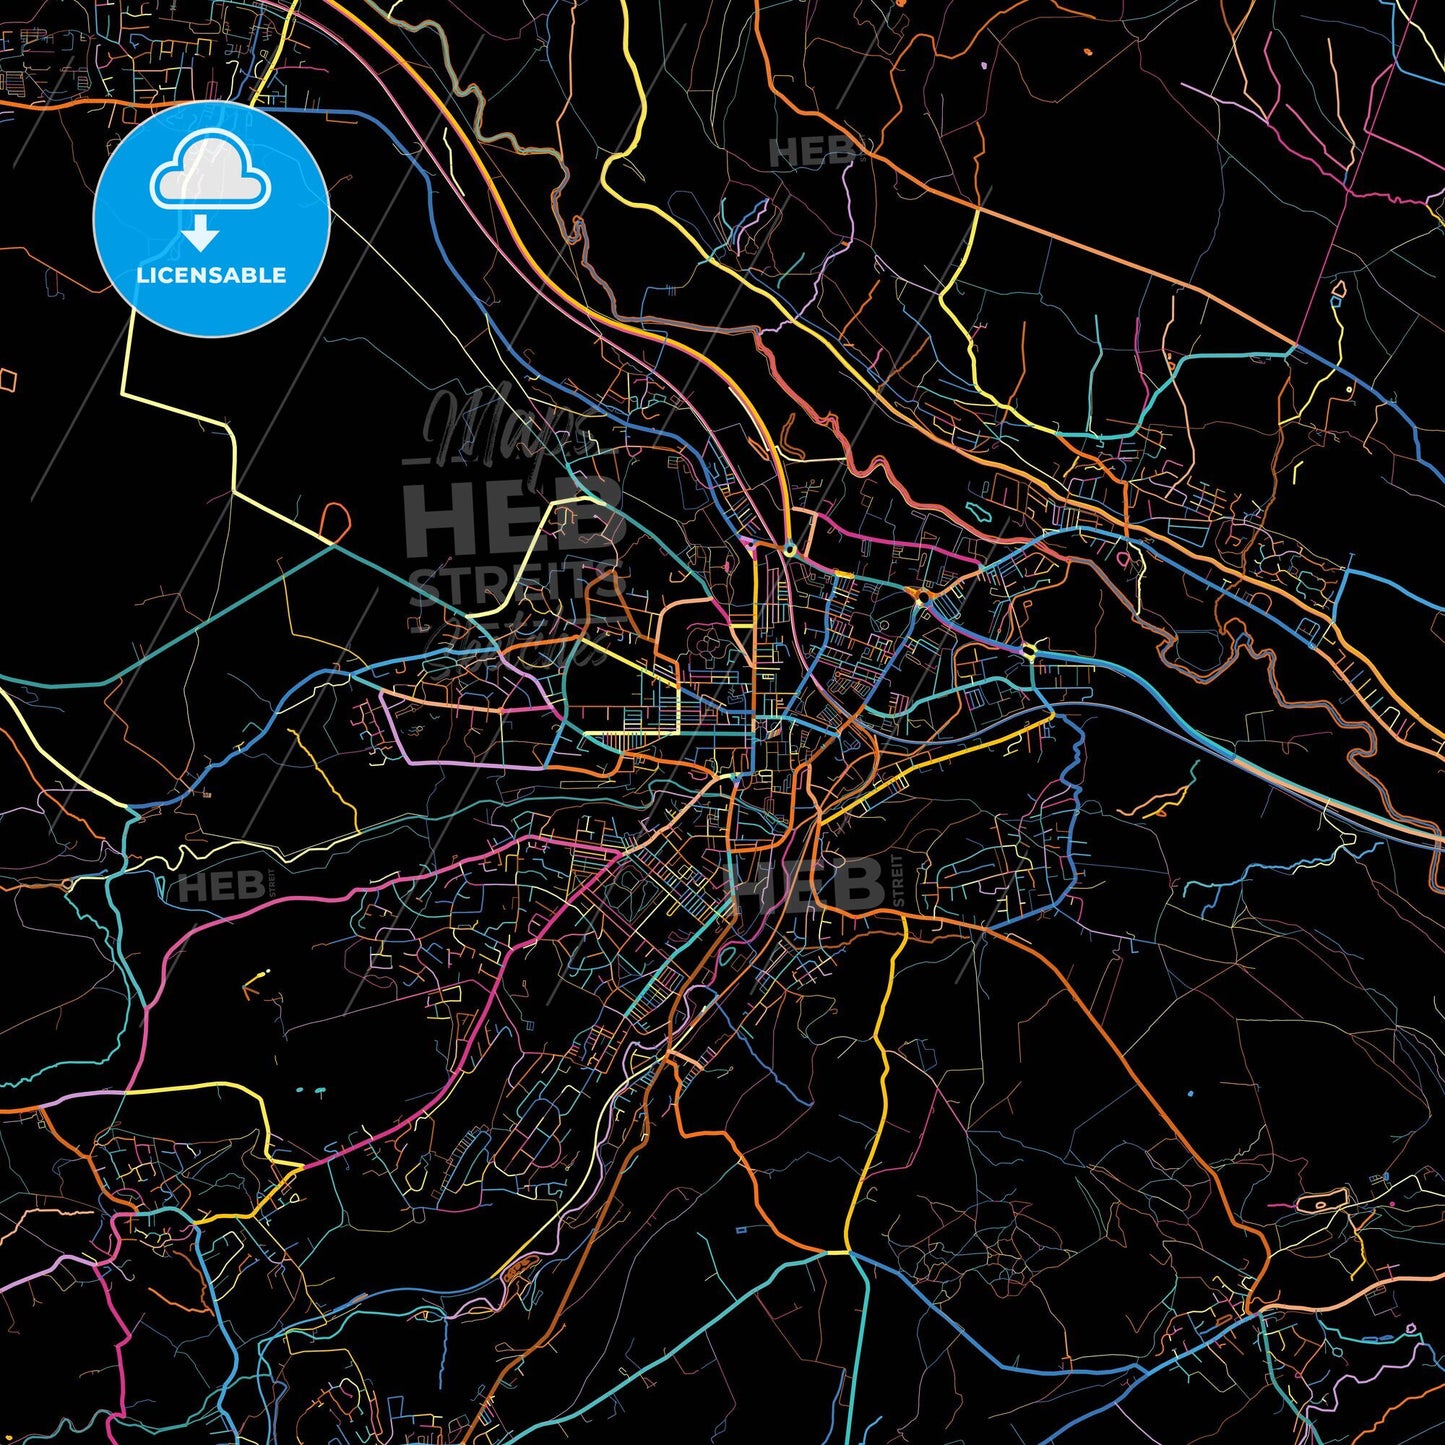 Keighley, Yorkshire and the Humber, England, colorful city map on black background